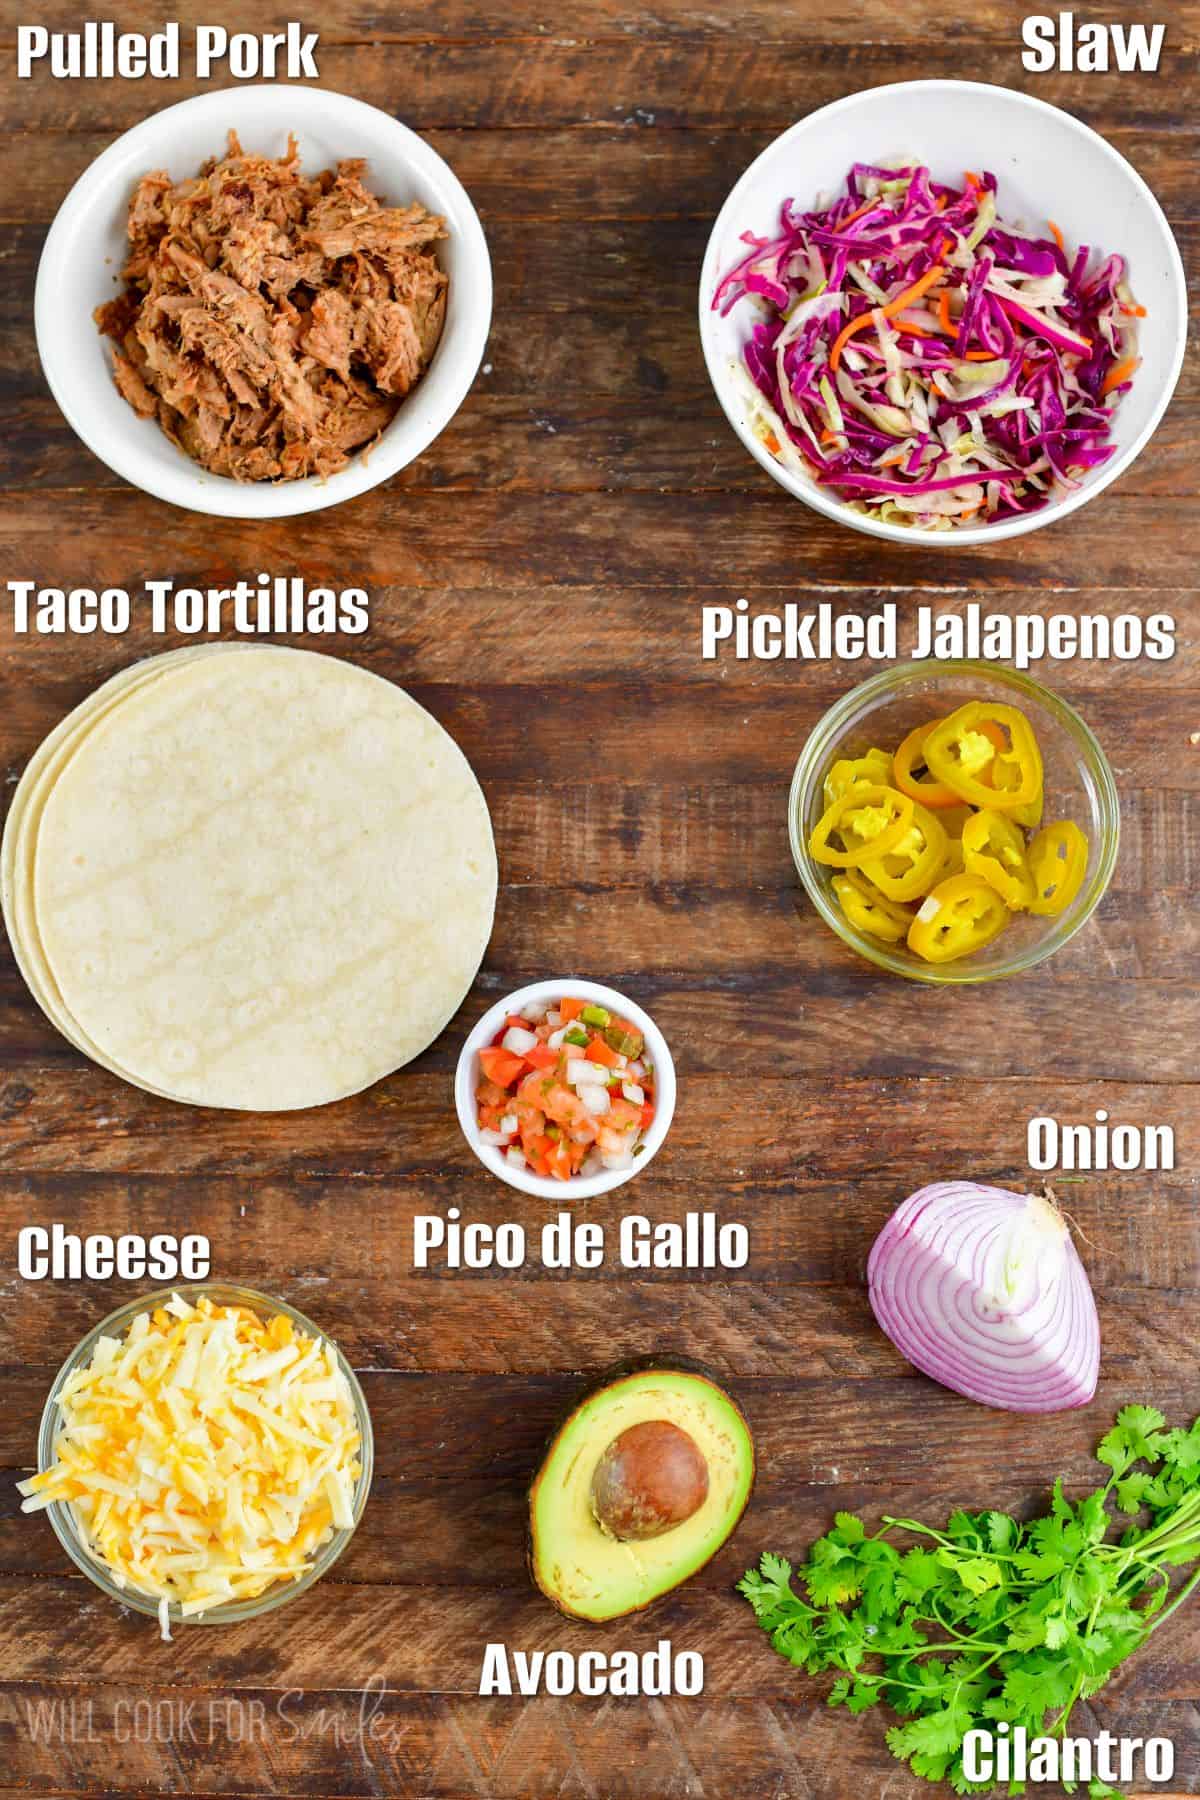 Labeled ingredients for pulled pork tacos on a wood surface.